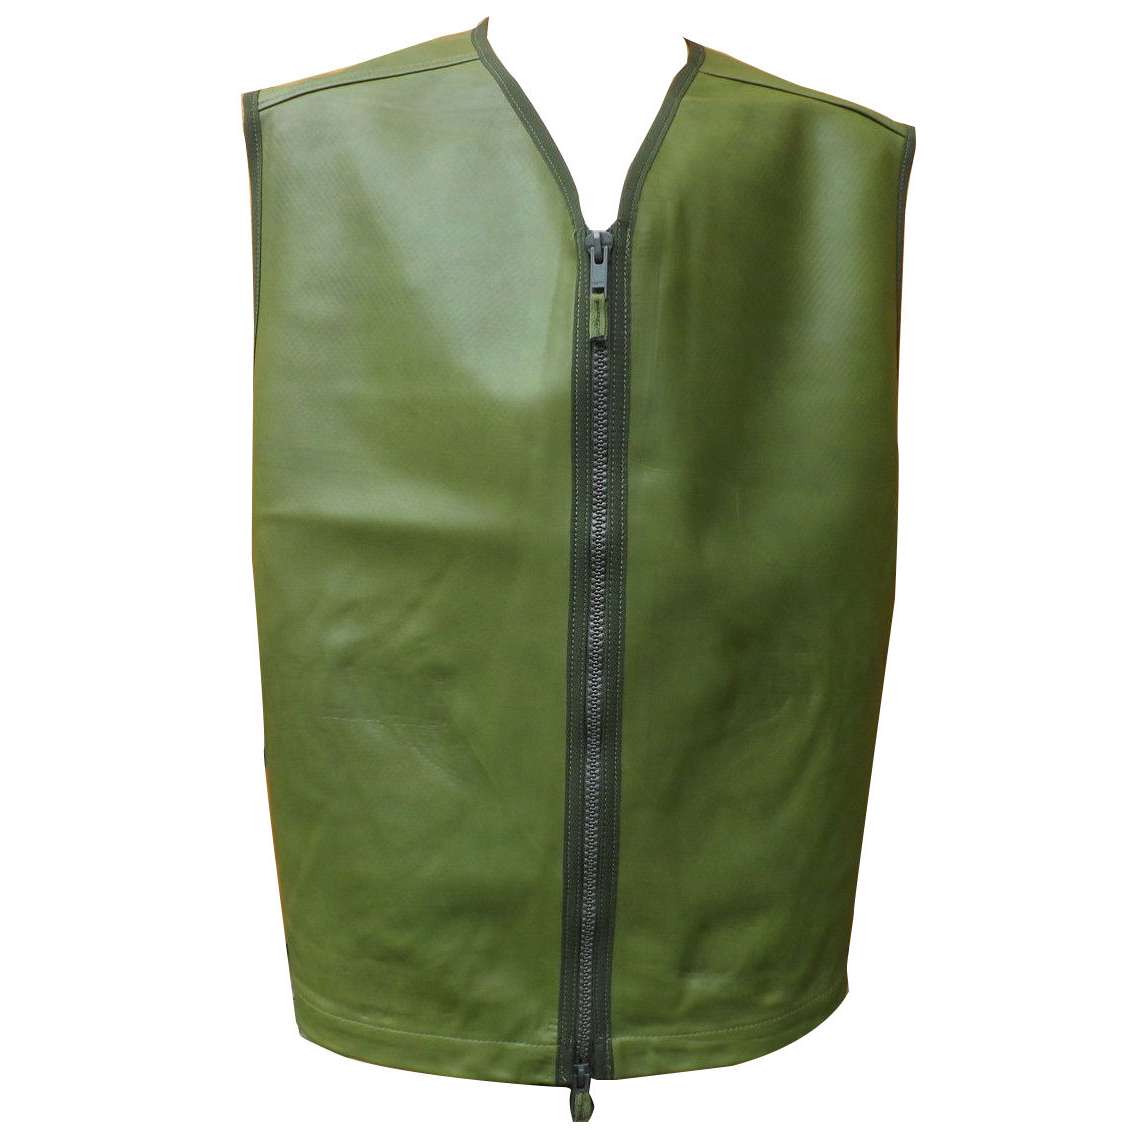 Hunting &amp; Fishing>Clothing|Wholesale>Clothing|Colours>Green|Clothing>Bodywarmers &amp; Waistcoats